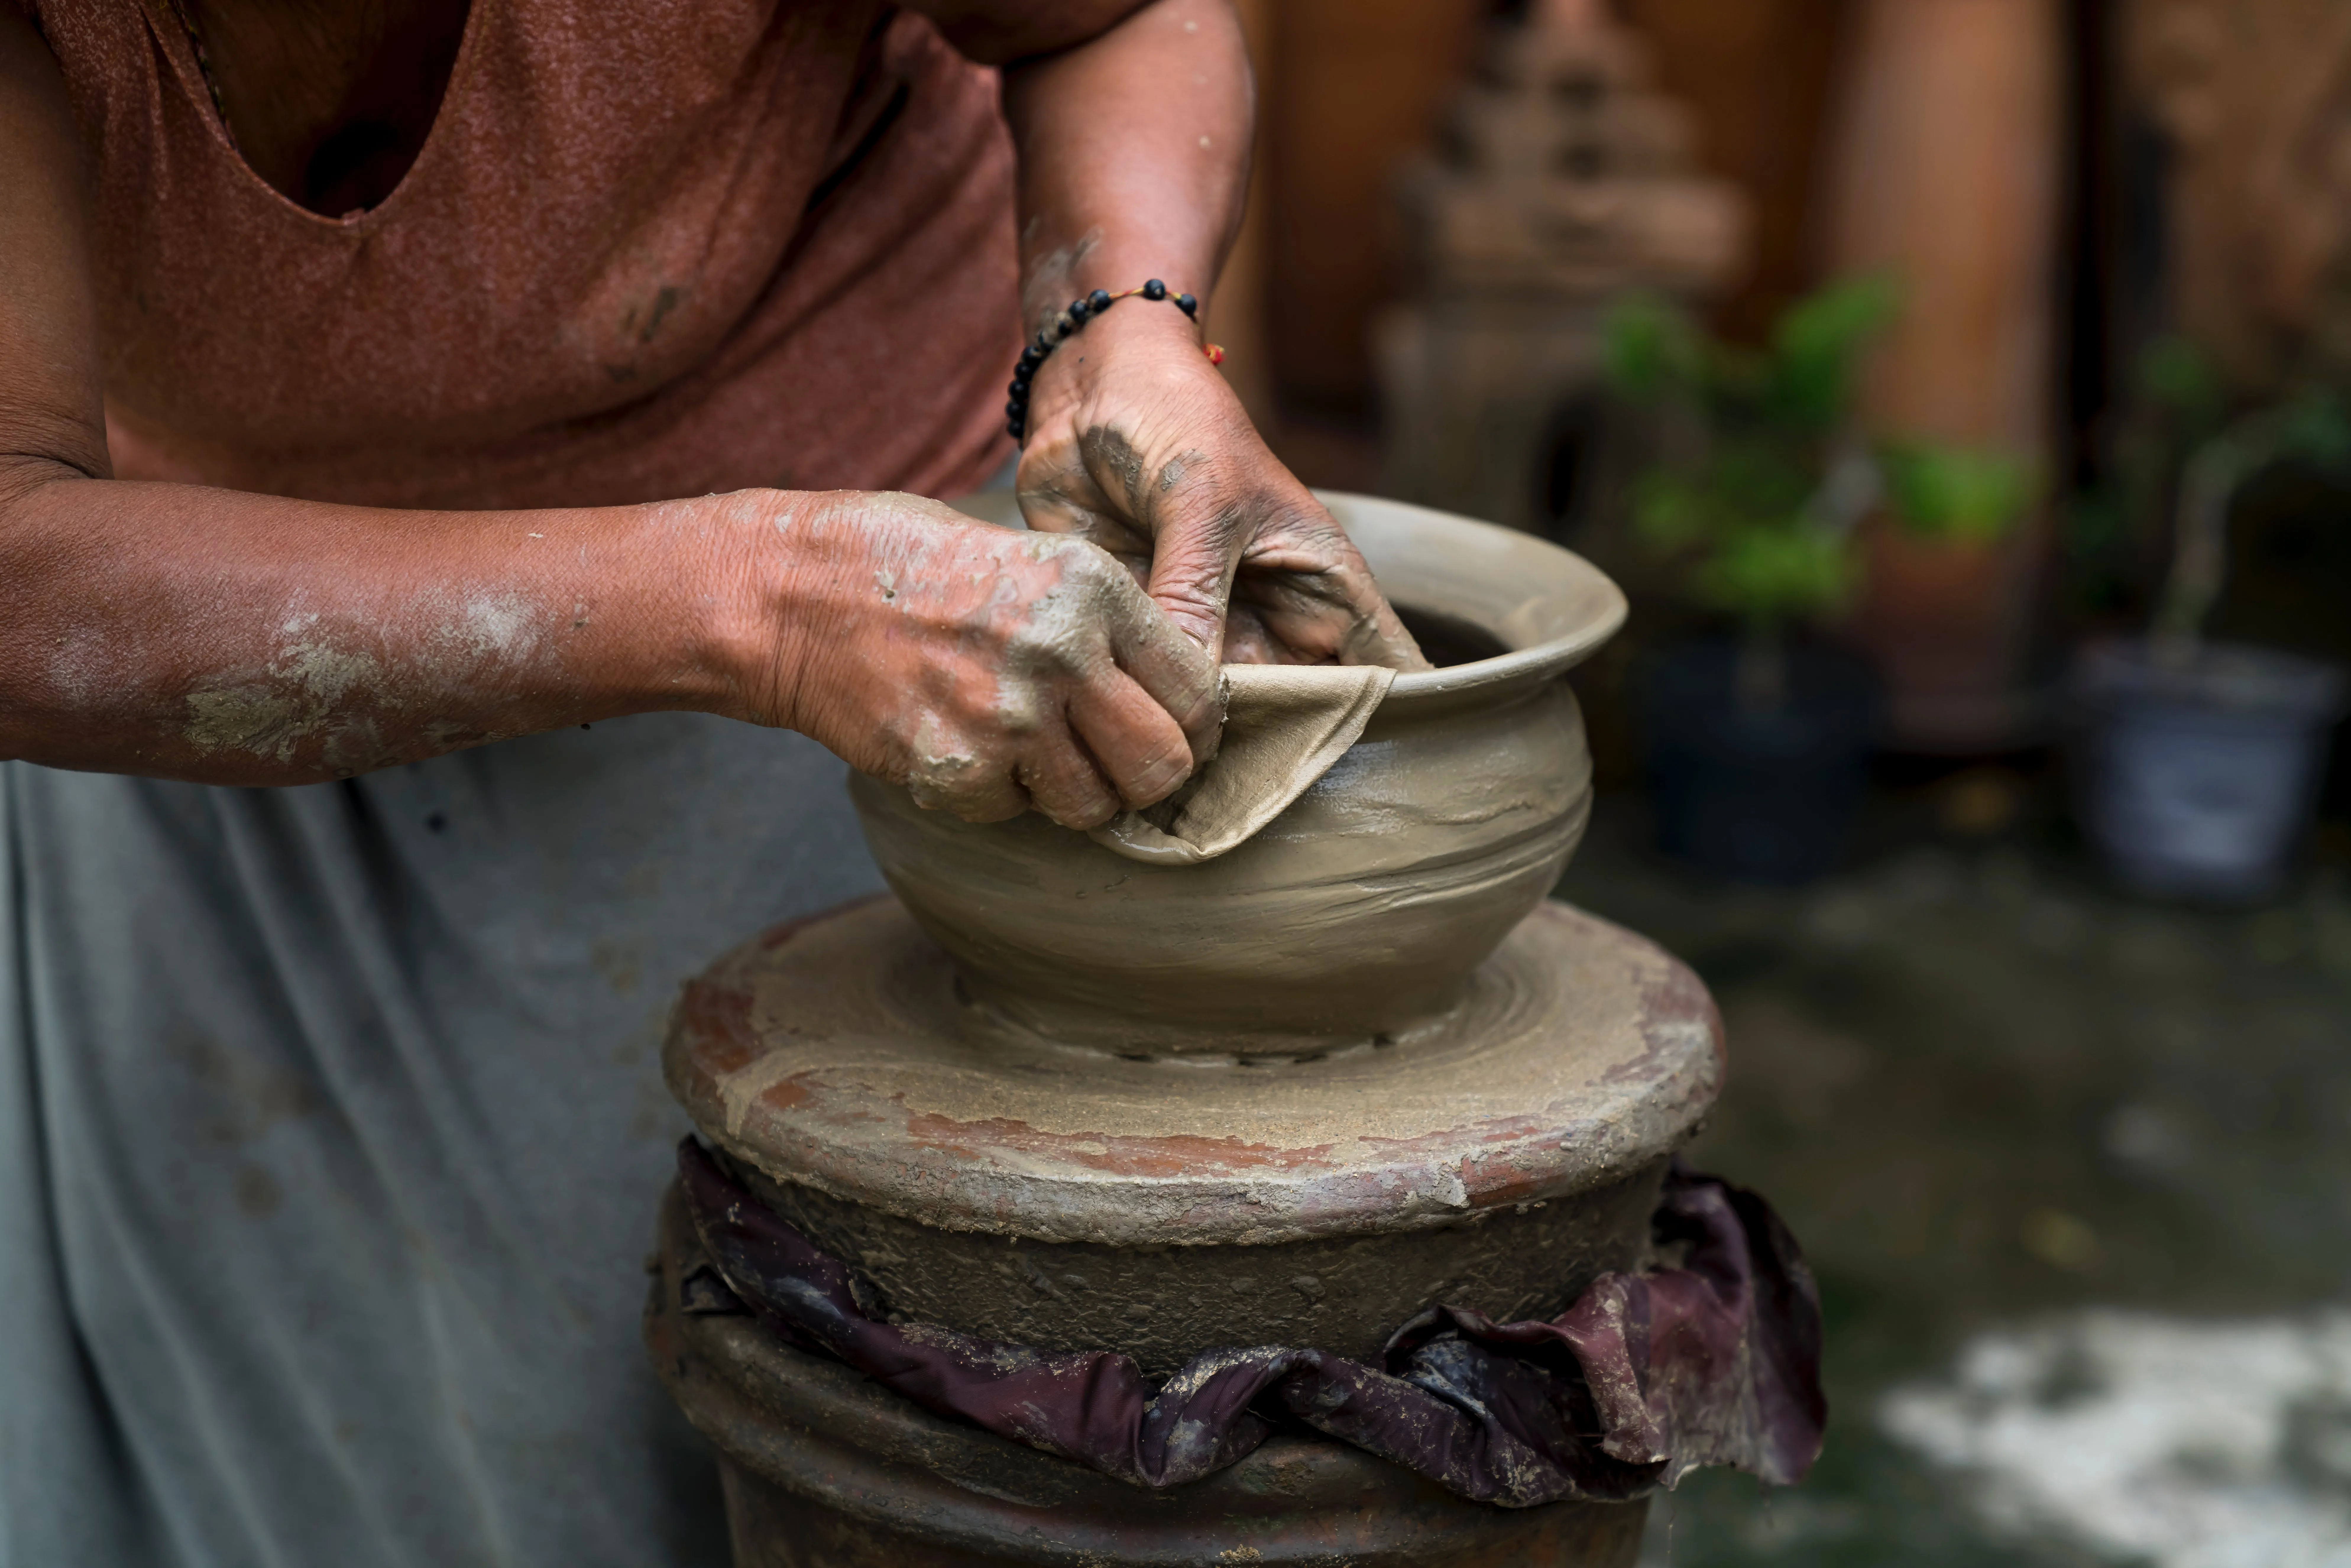 The Art of Pottery: A Therapeutic Creative Outlet